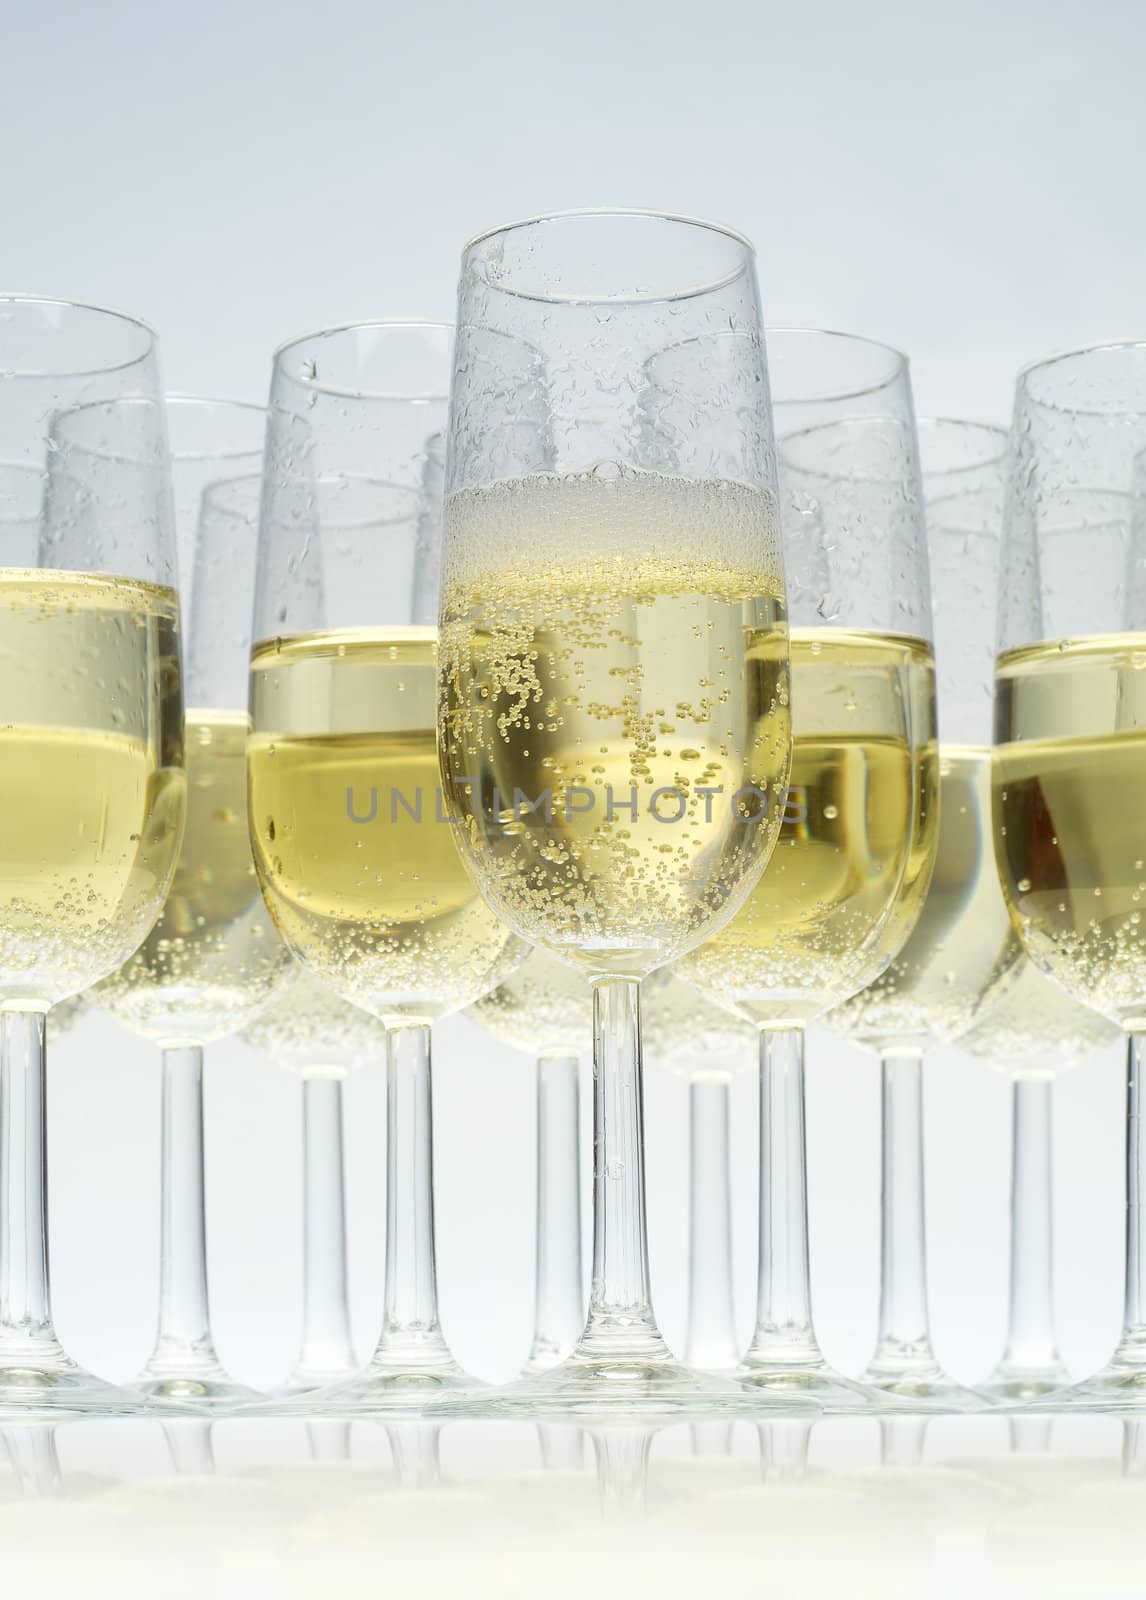 Glasses of champagne on white background